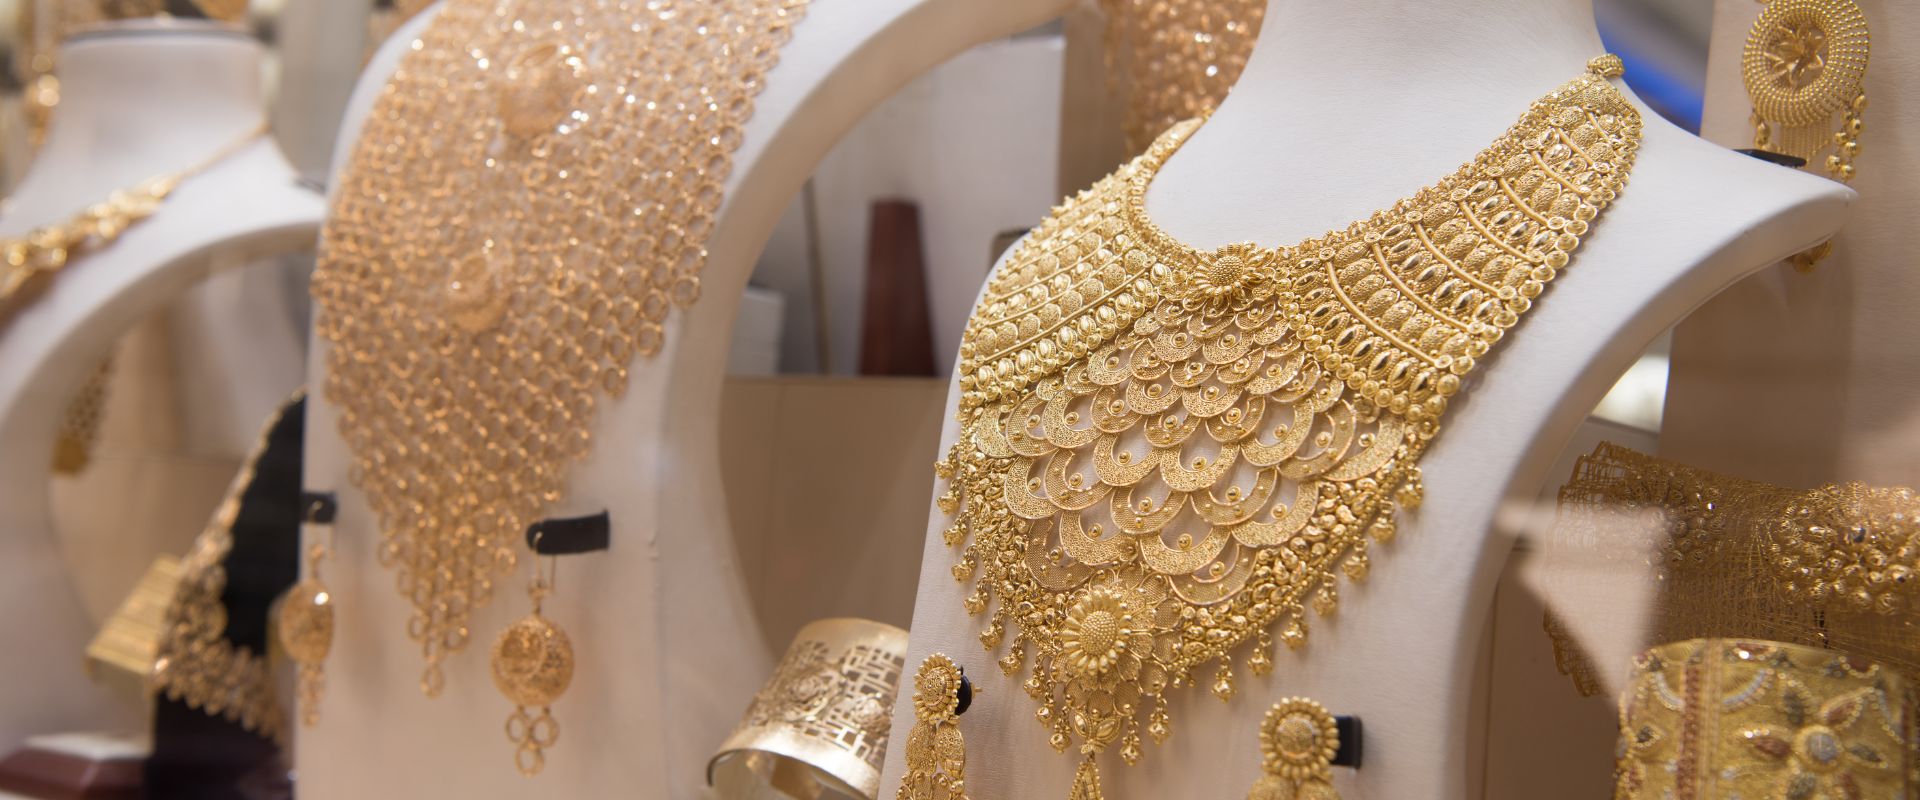 gold jewelry shop in India